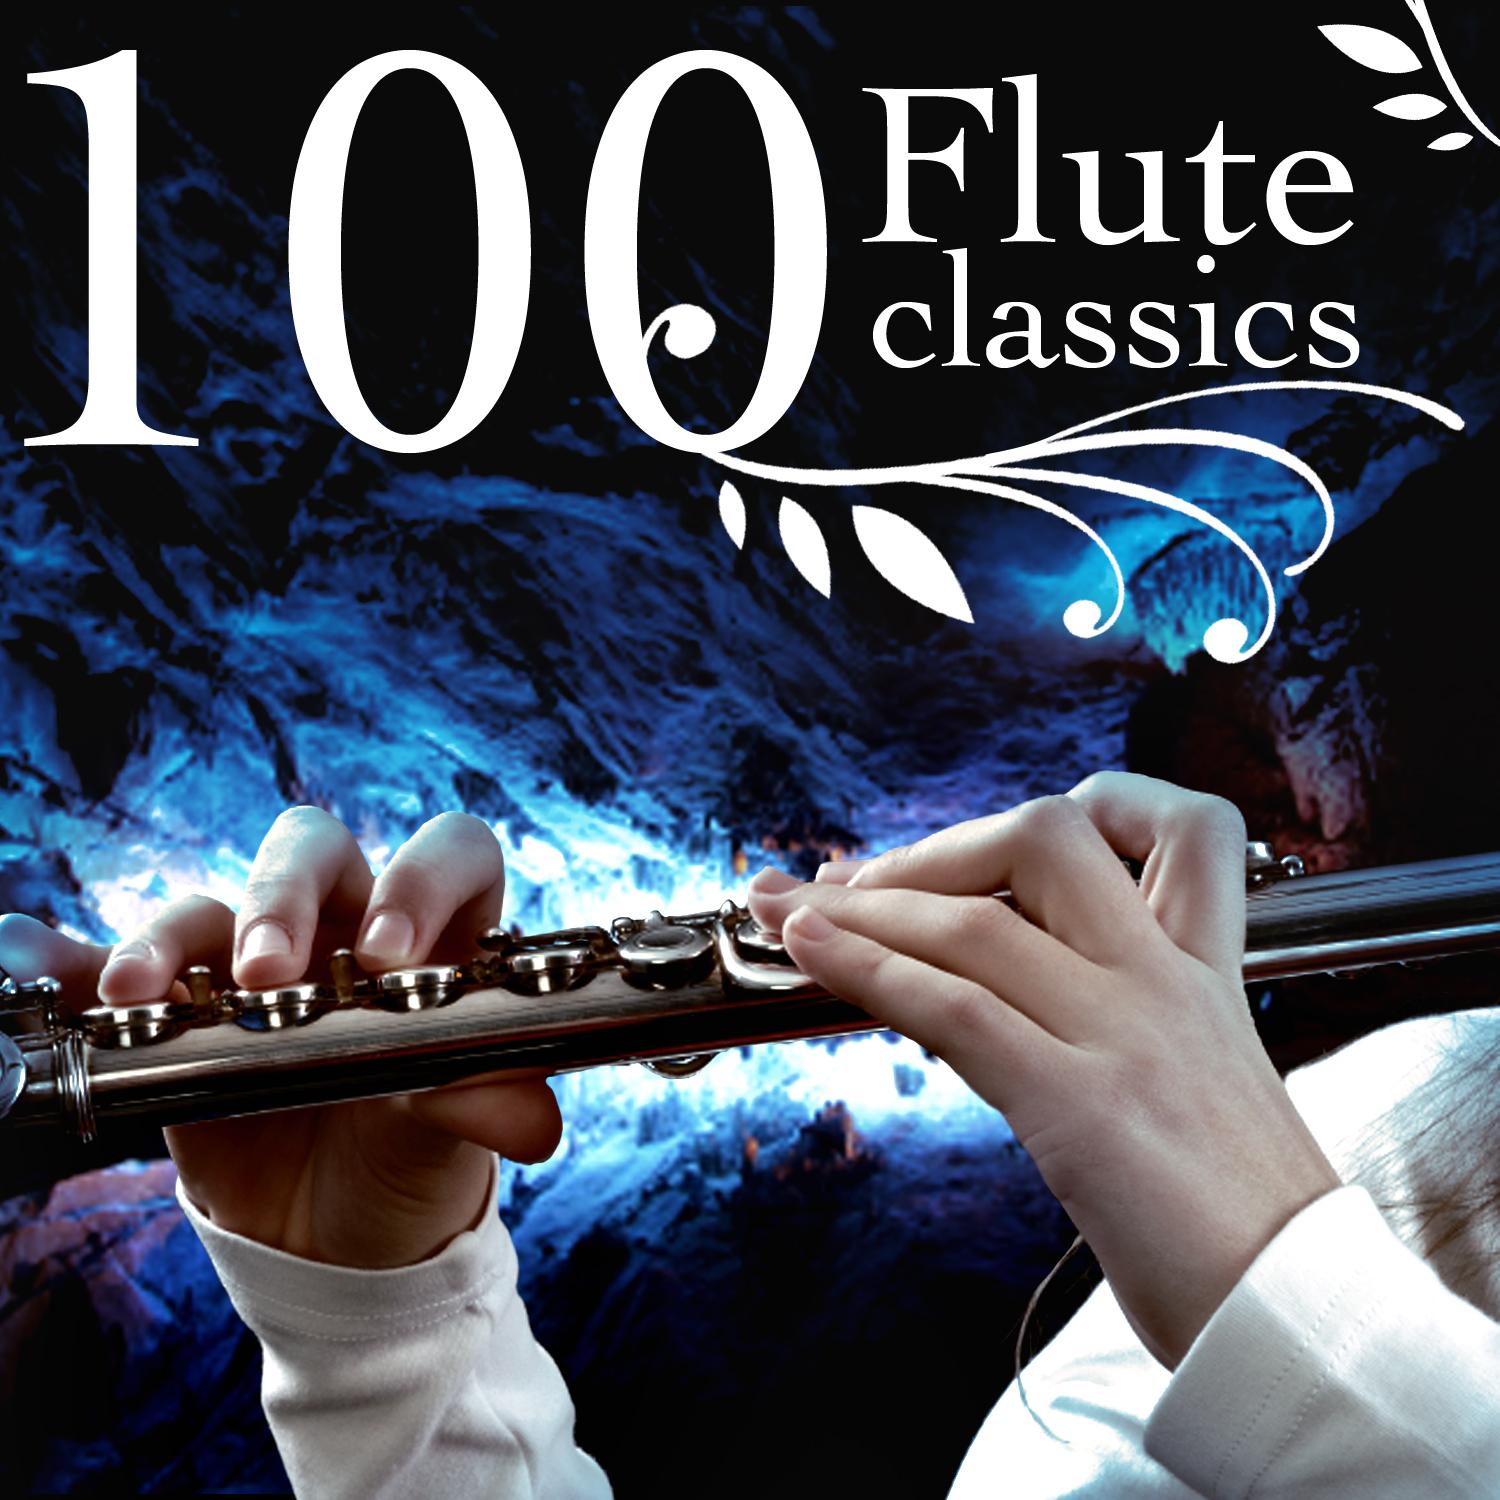 Concerto For Flute And Orchestra In G Major - I. Allegro